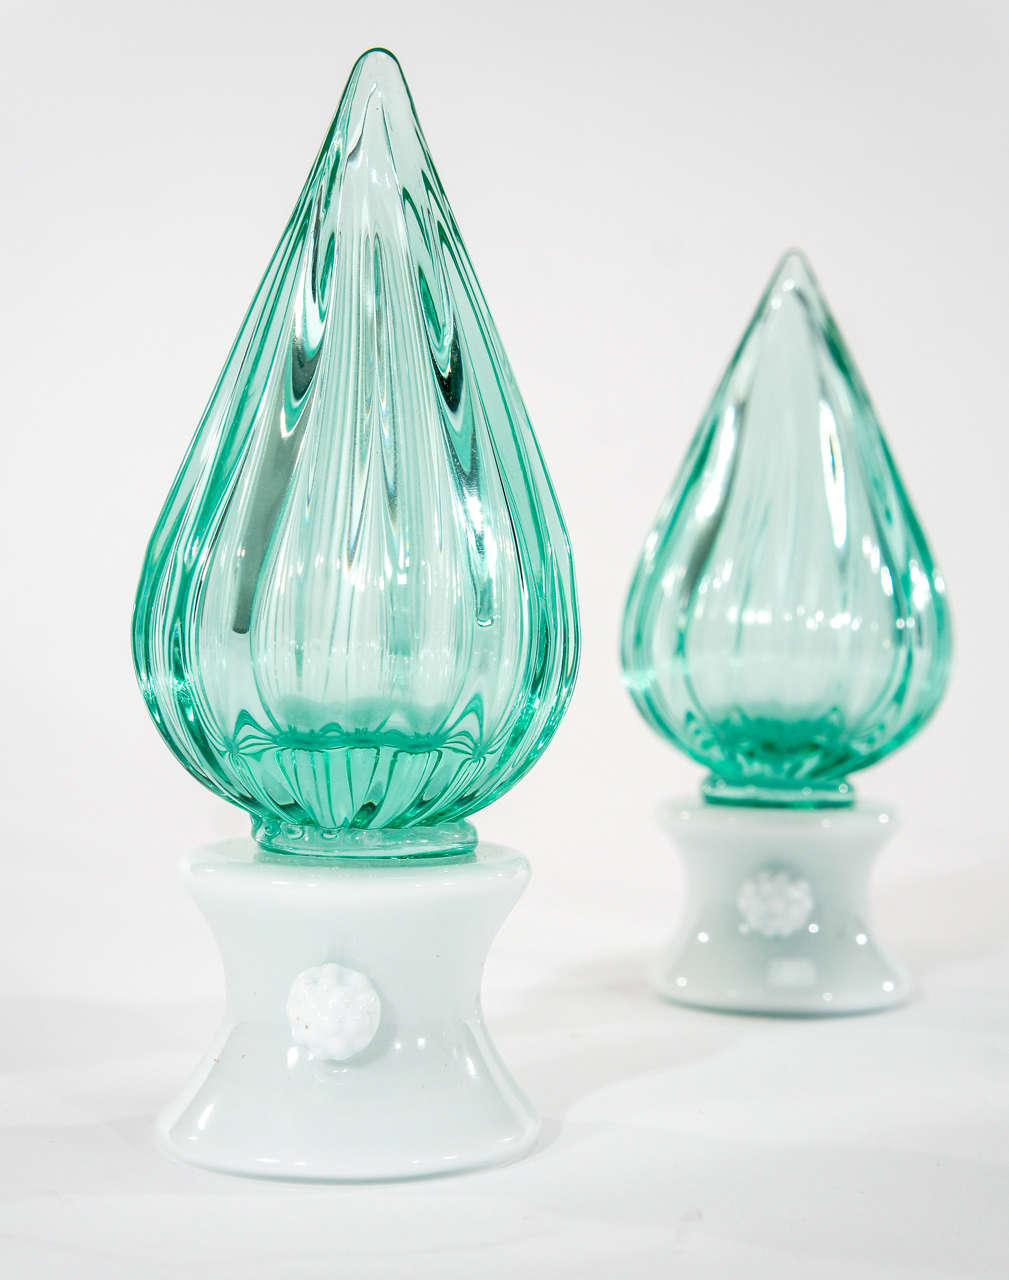 Crystal Set of 5 Venini Murano Hand Blown Teal Teardrop Sculptures/Garniture on Bases For Sale